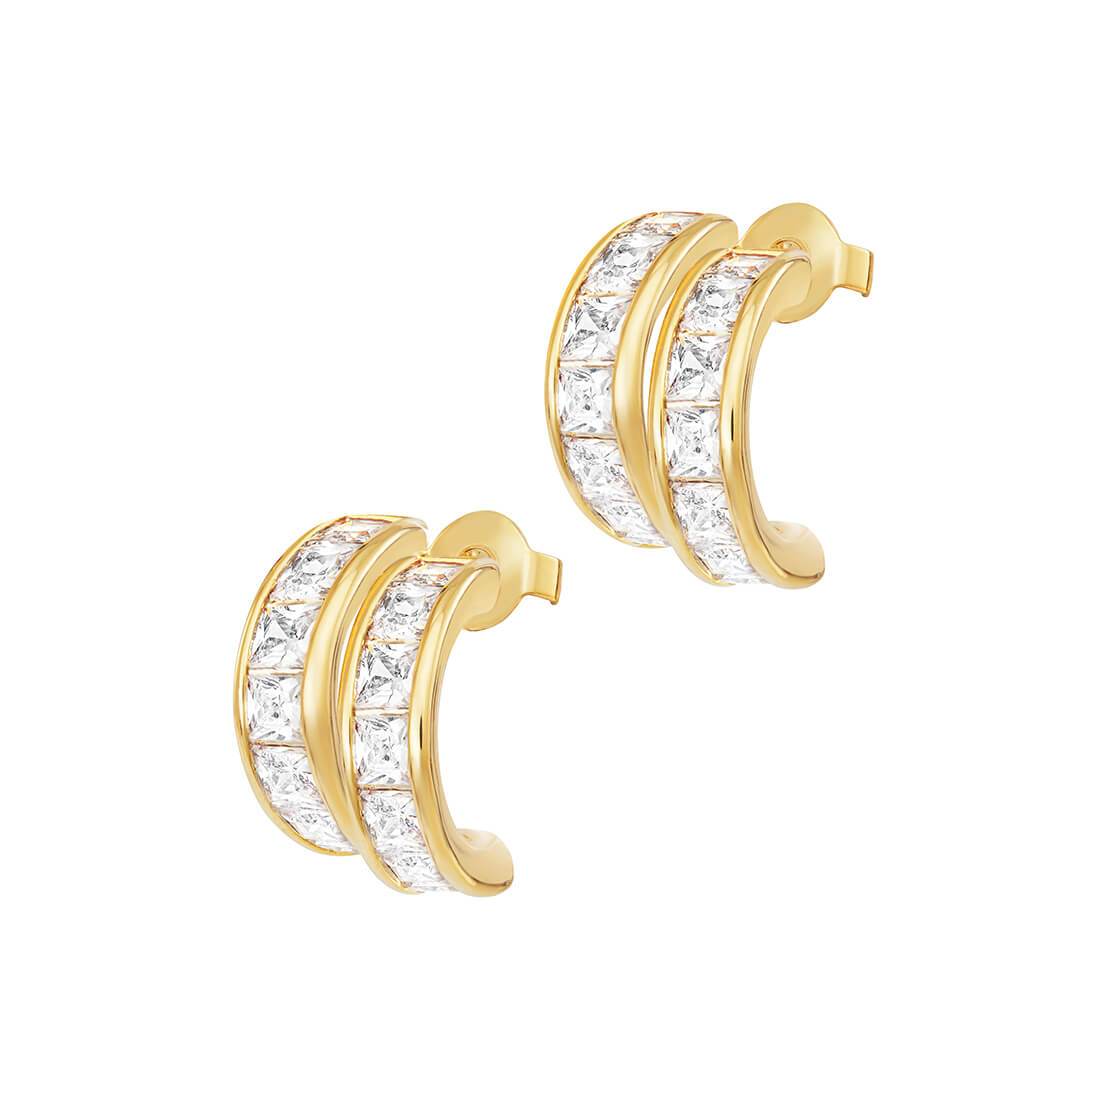 Fire and Ice Earrings - Gold